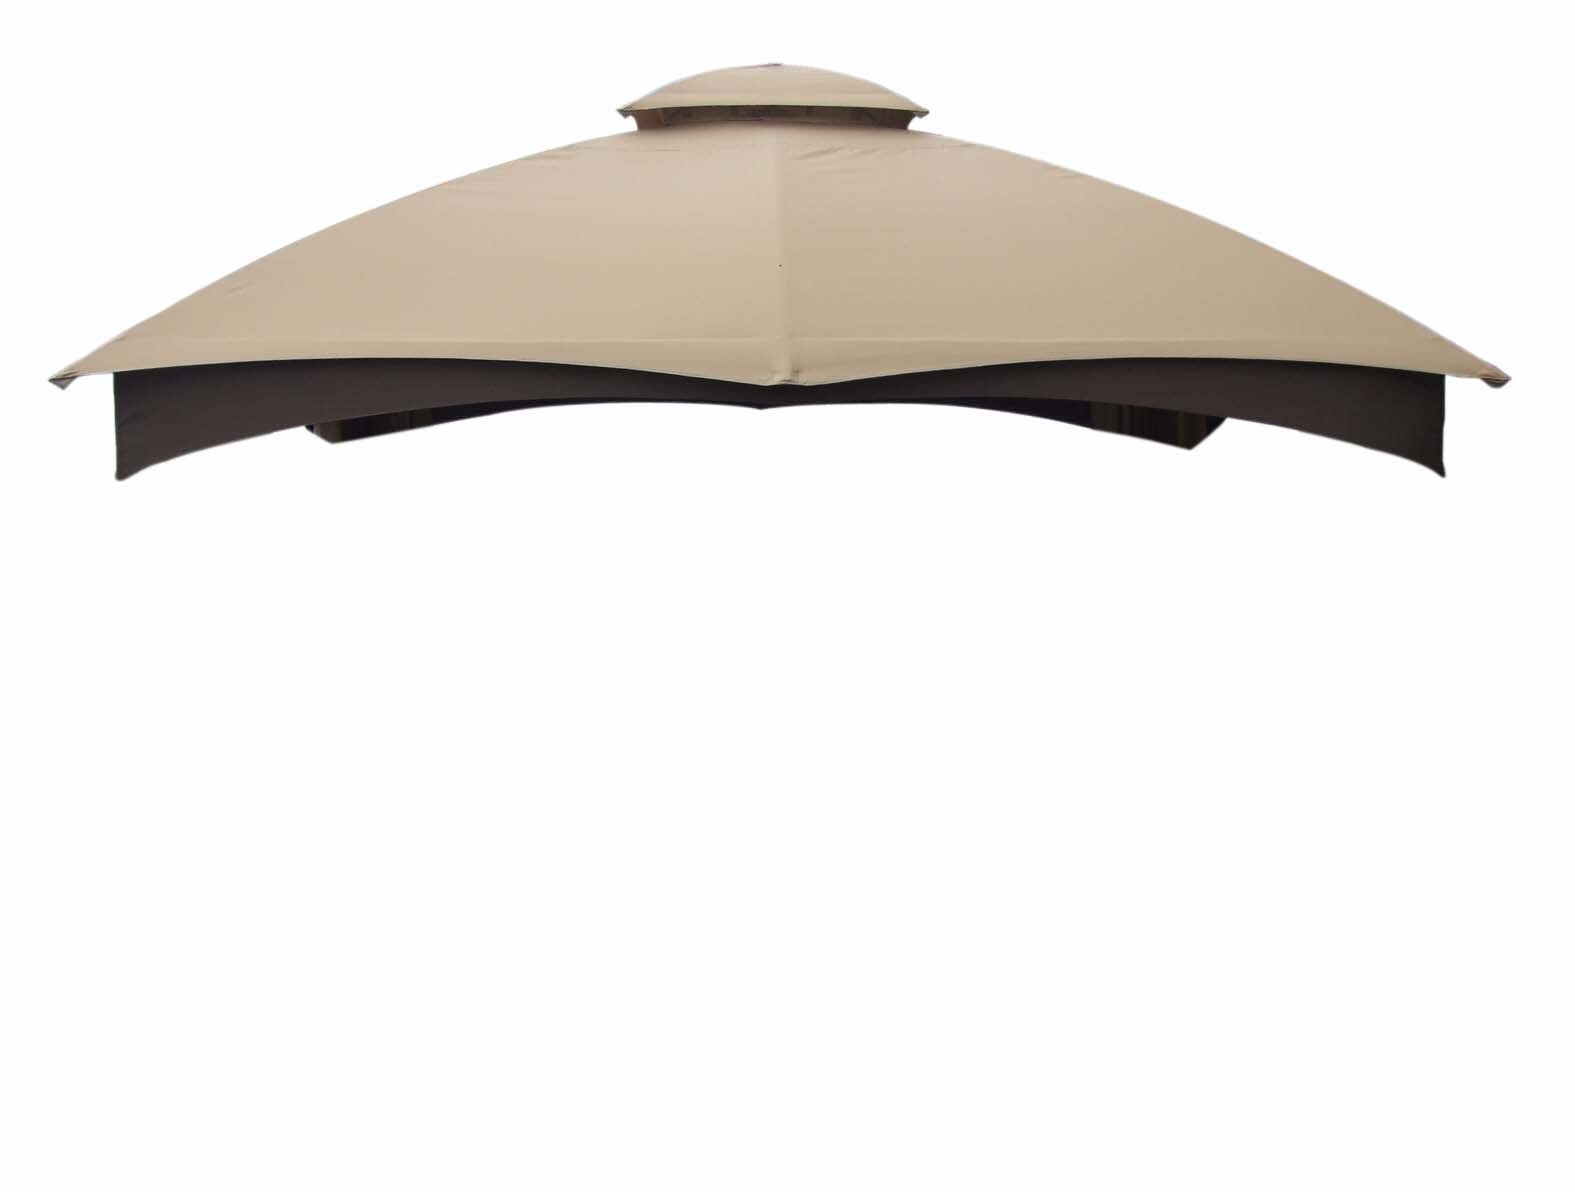 Details about   Replacement Canopy Top for Lowe's Allen Roth 10X12 Gazebo #GF-12S004B-1 